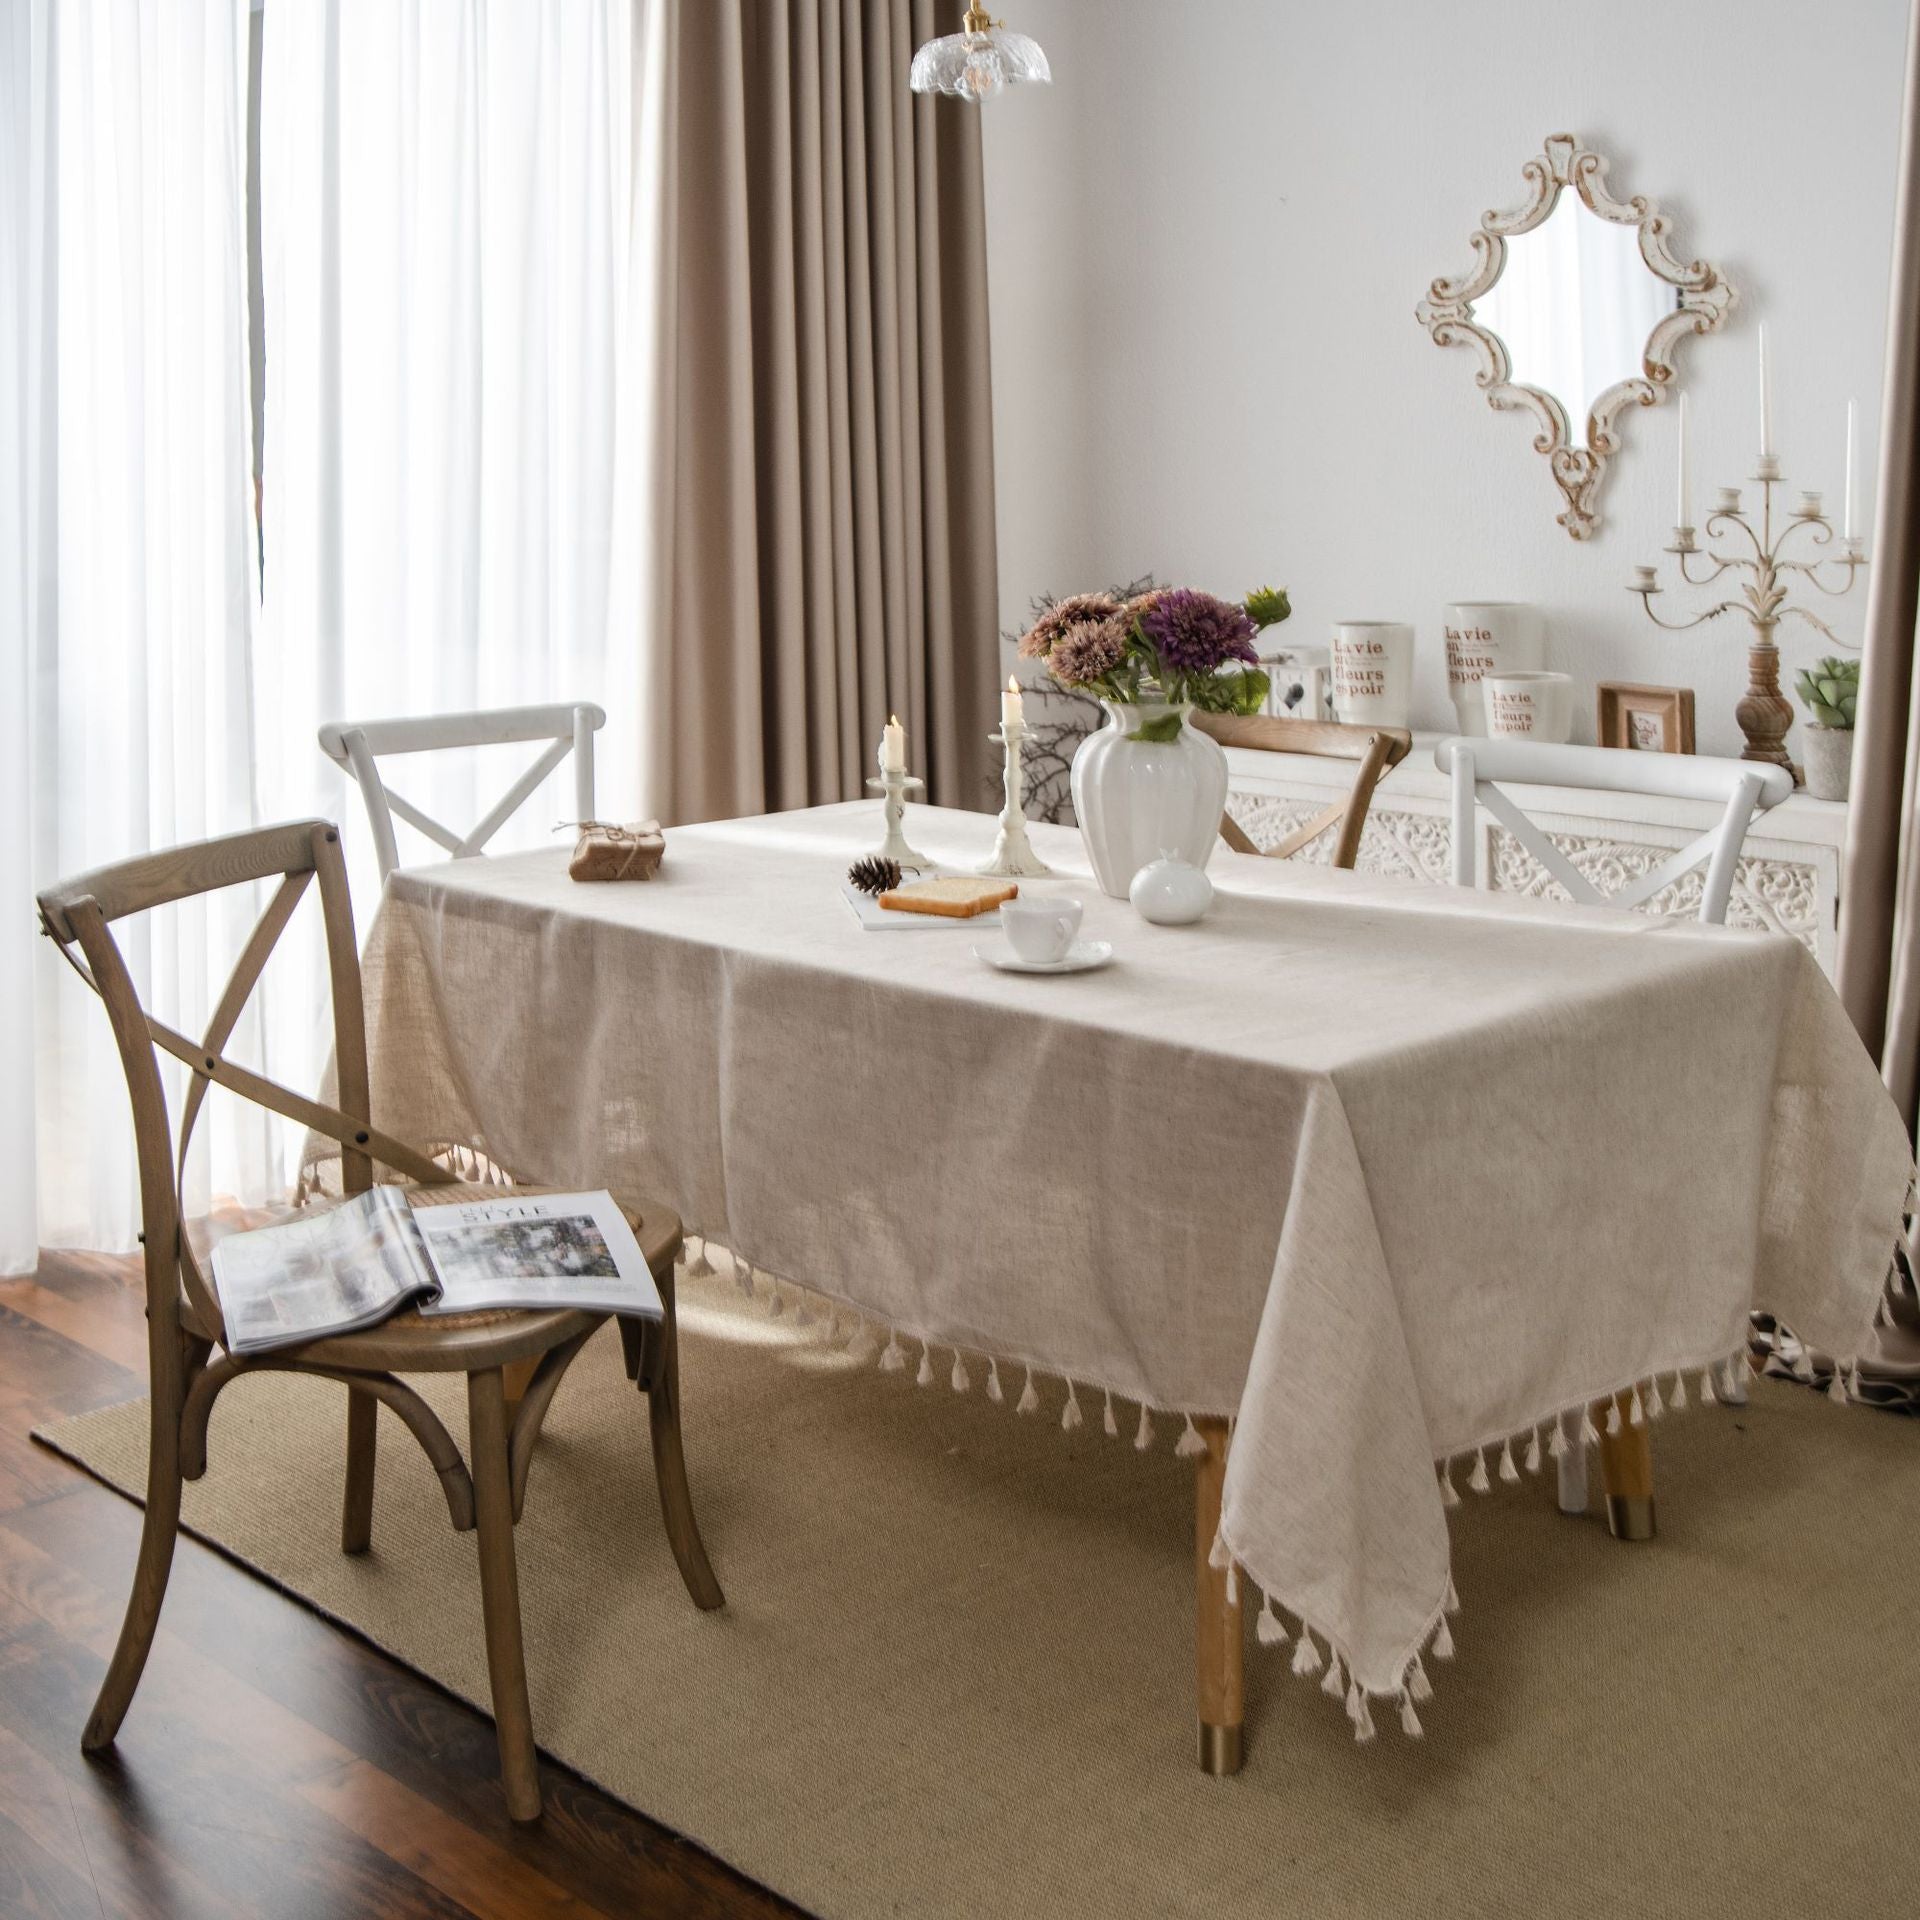 Bulk Linen Tablecloth Rectangle Tassel Table Cloth for Kitchen Dining Room Table Cover Wholesale